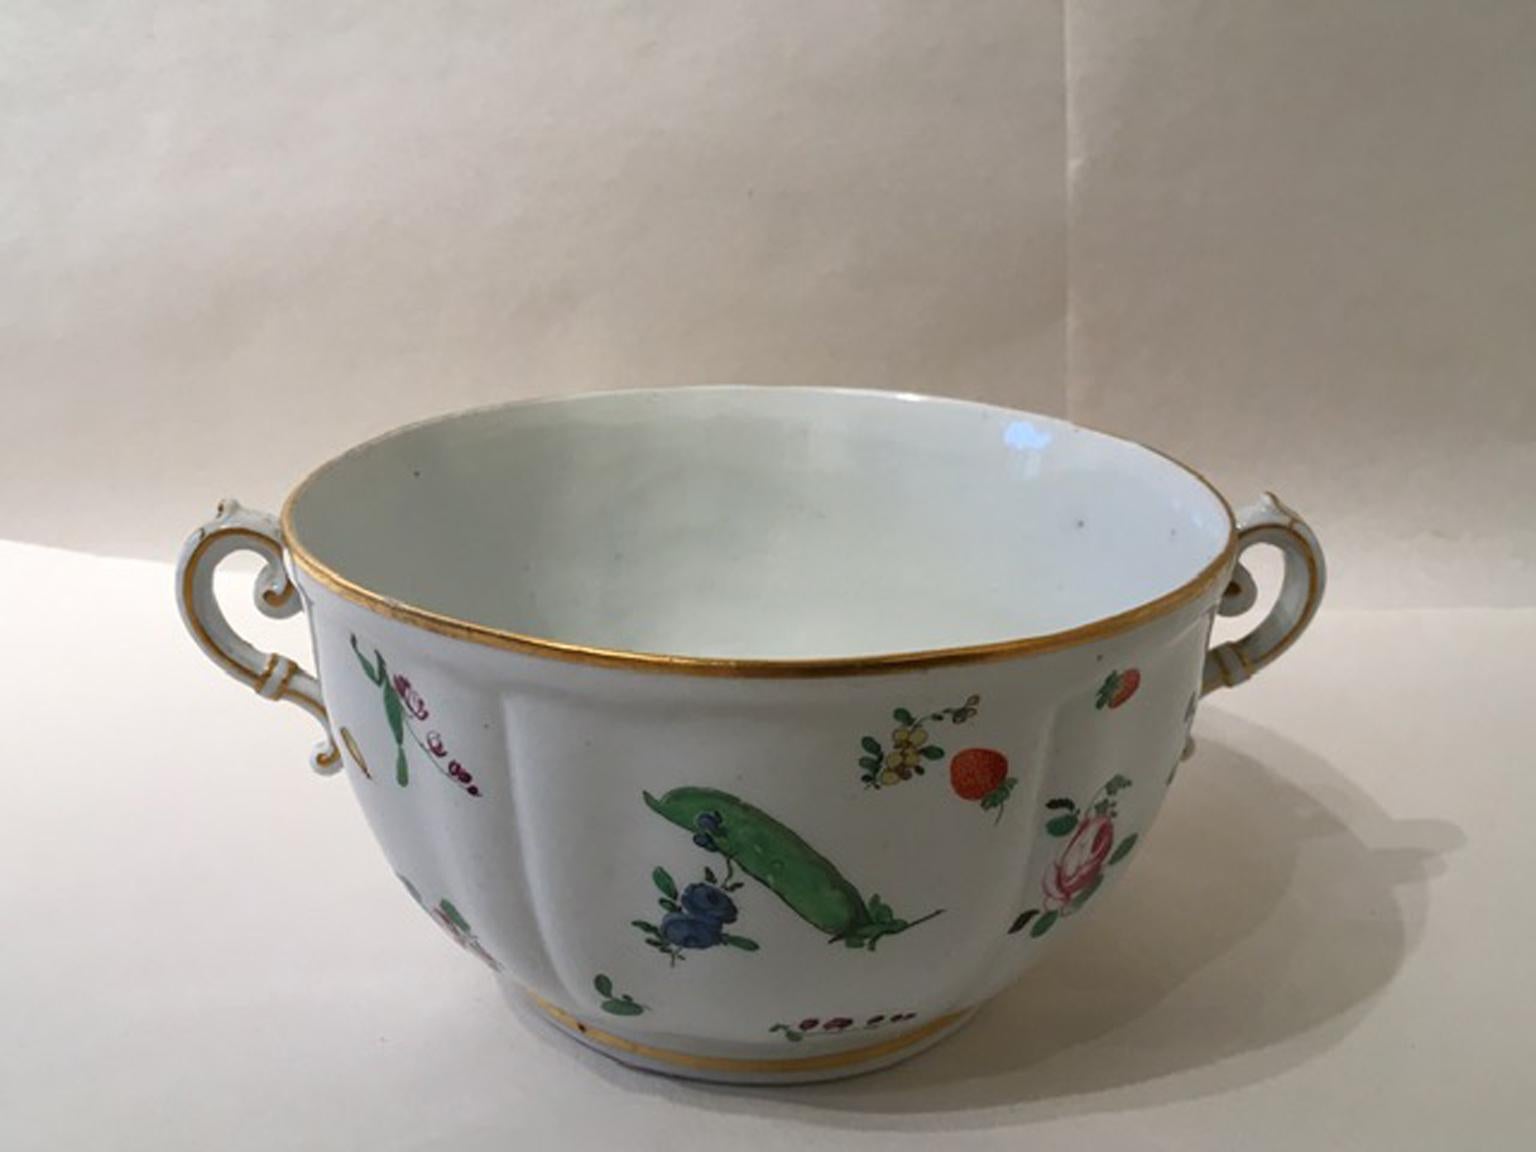 Italy Richard Ginori Mid-19th Century Porcelain Covered For Sale 4